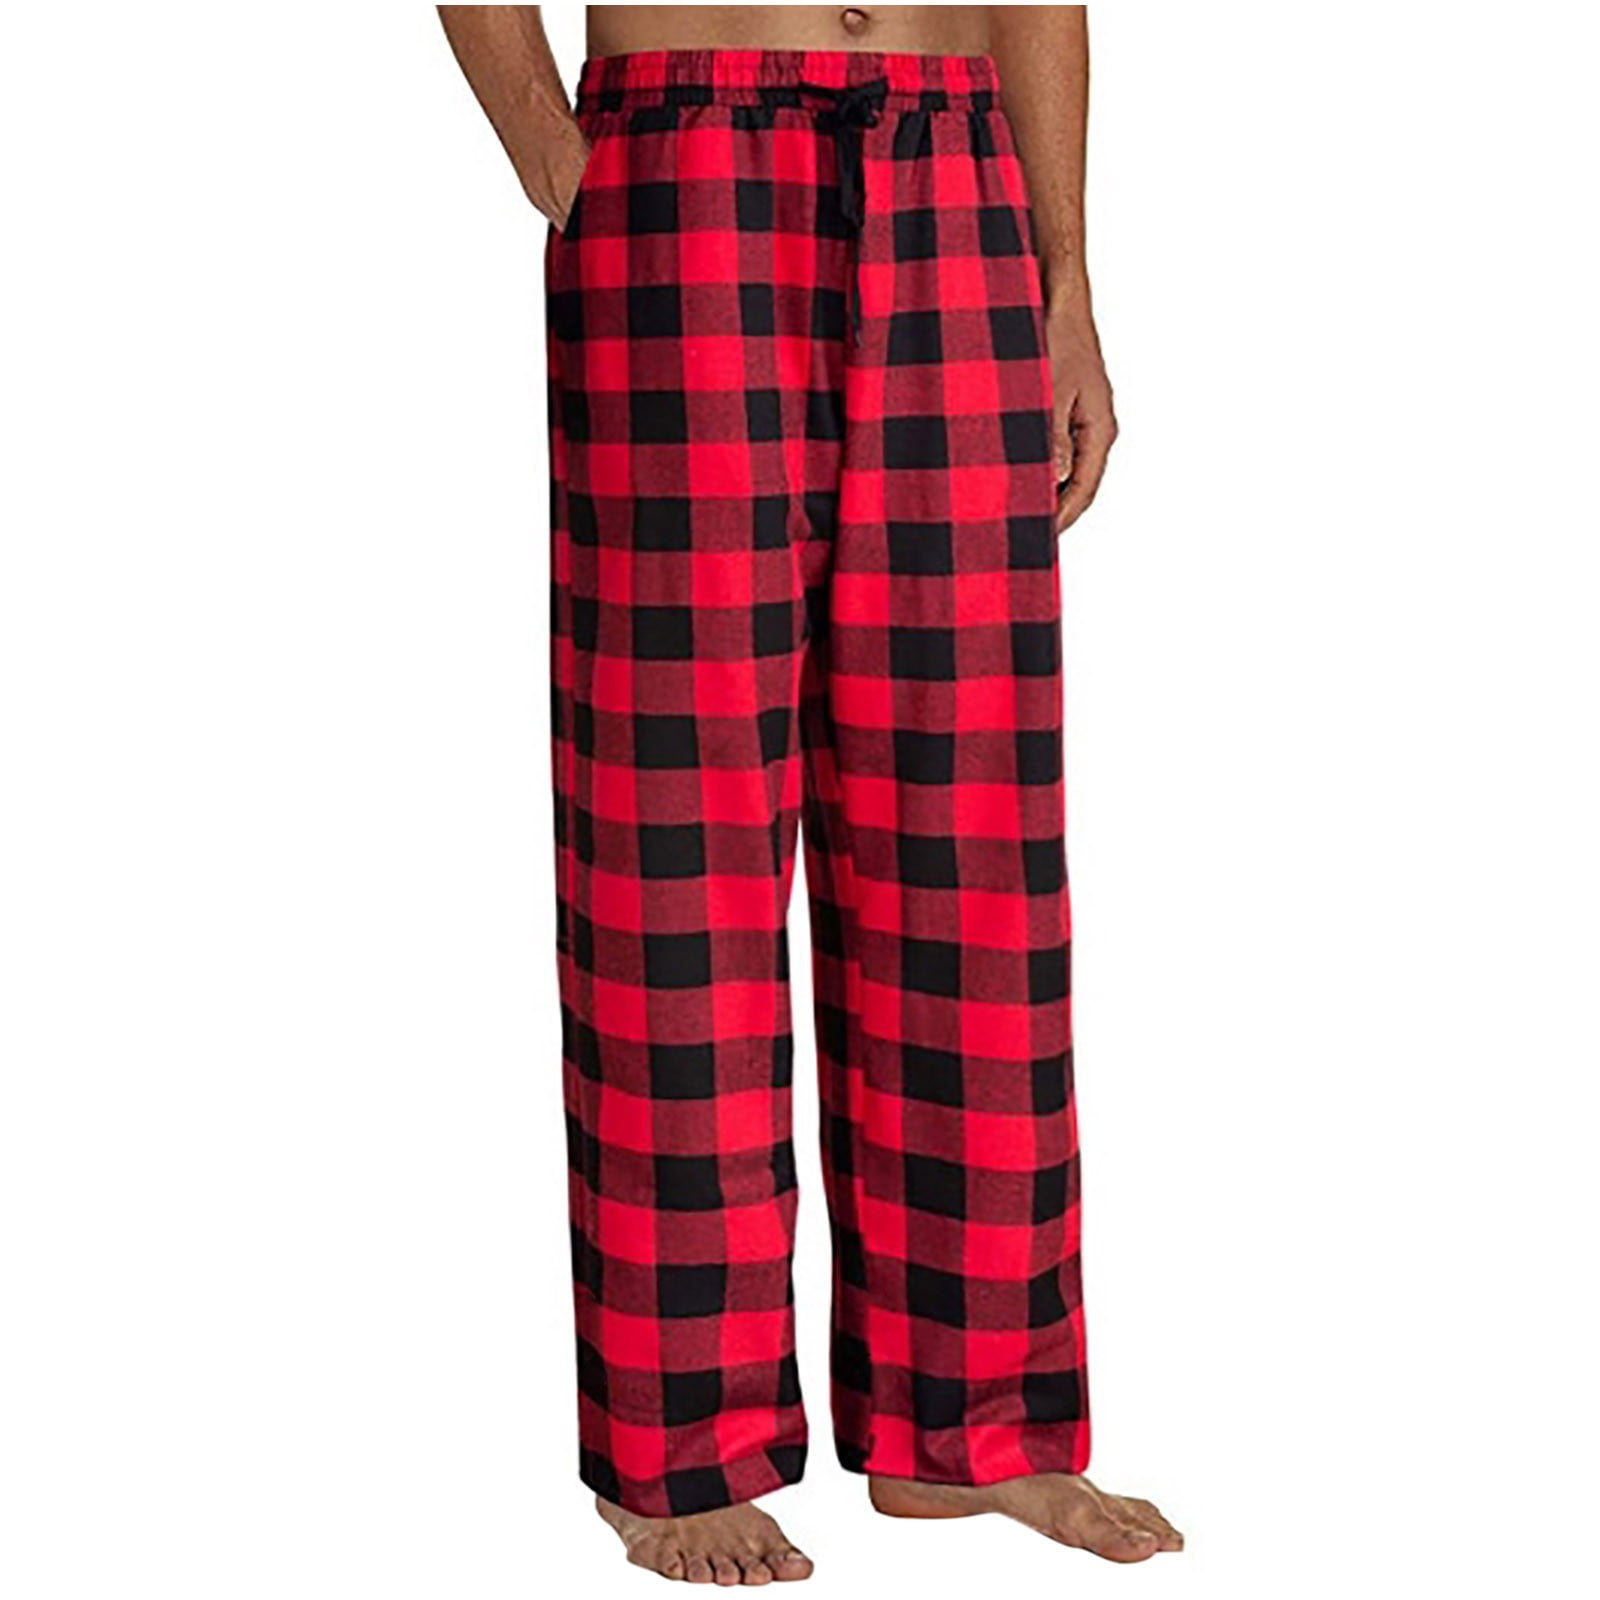 Reduced Price and Clearance Sale Juebong Fashion Men's Casual Plaid Loose  Sport Plaid Pajama Pants Trousers,Red,L